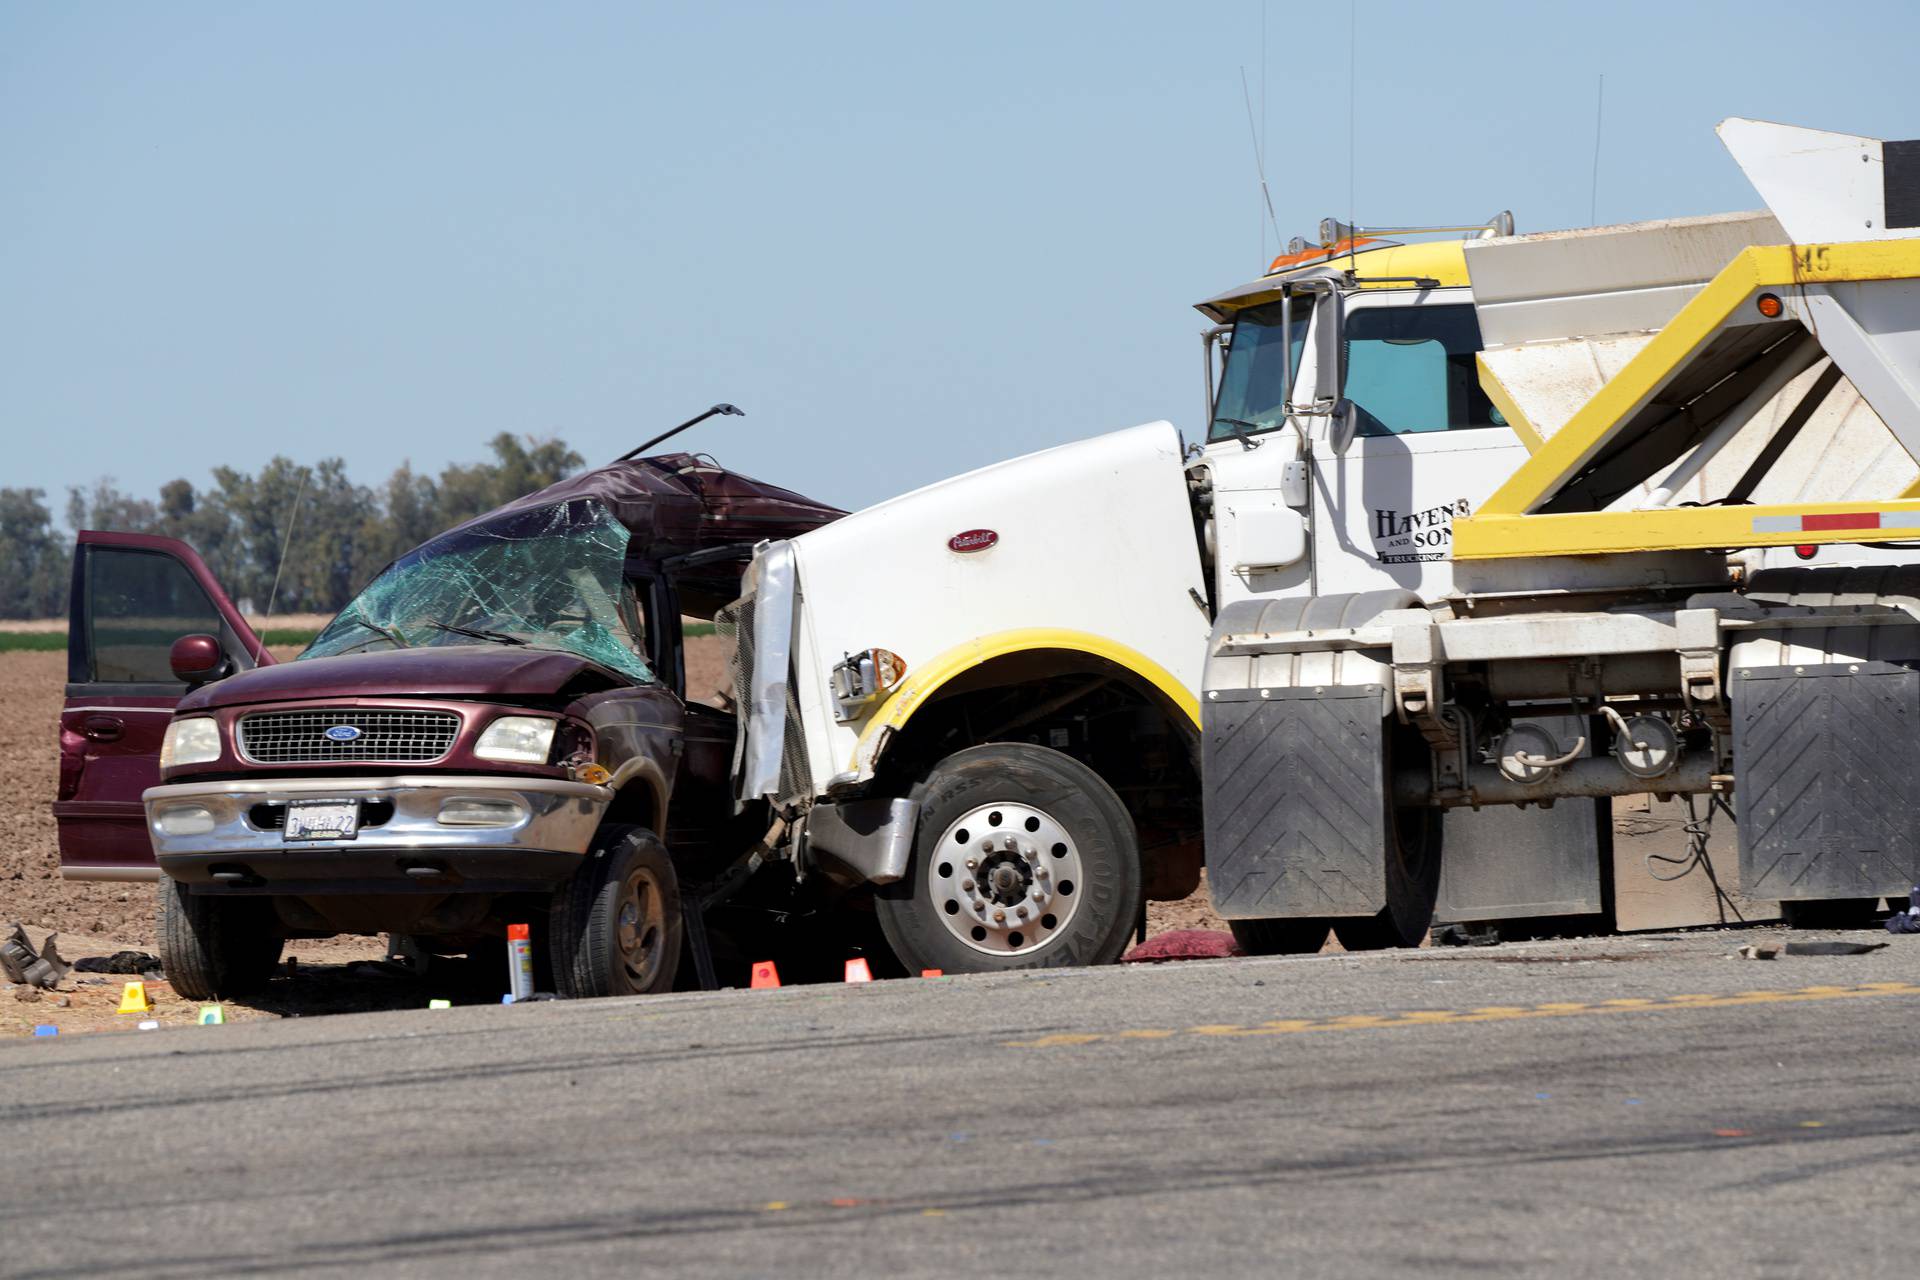 Collision between a sport utility vehicle (SUV) and a tractor trailer truck near Holtville